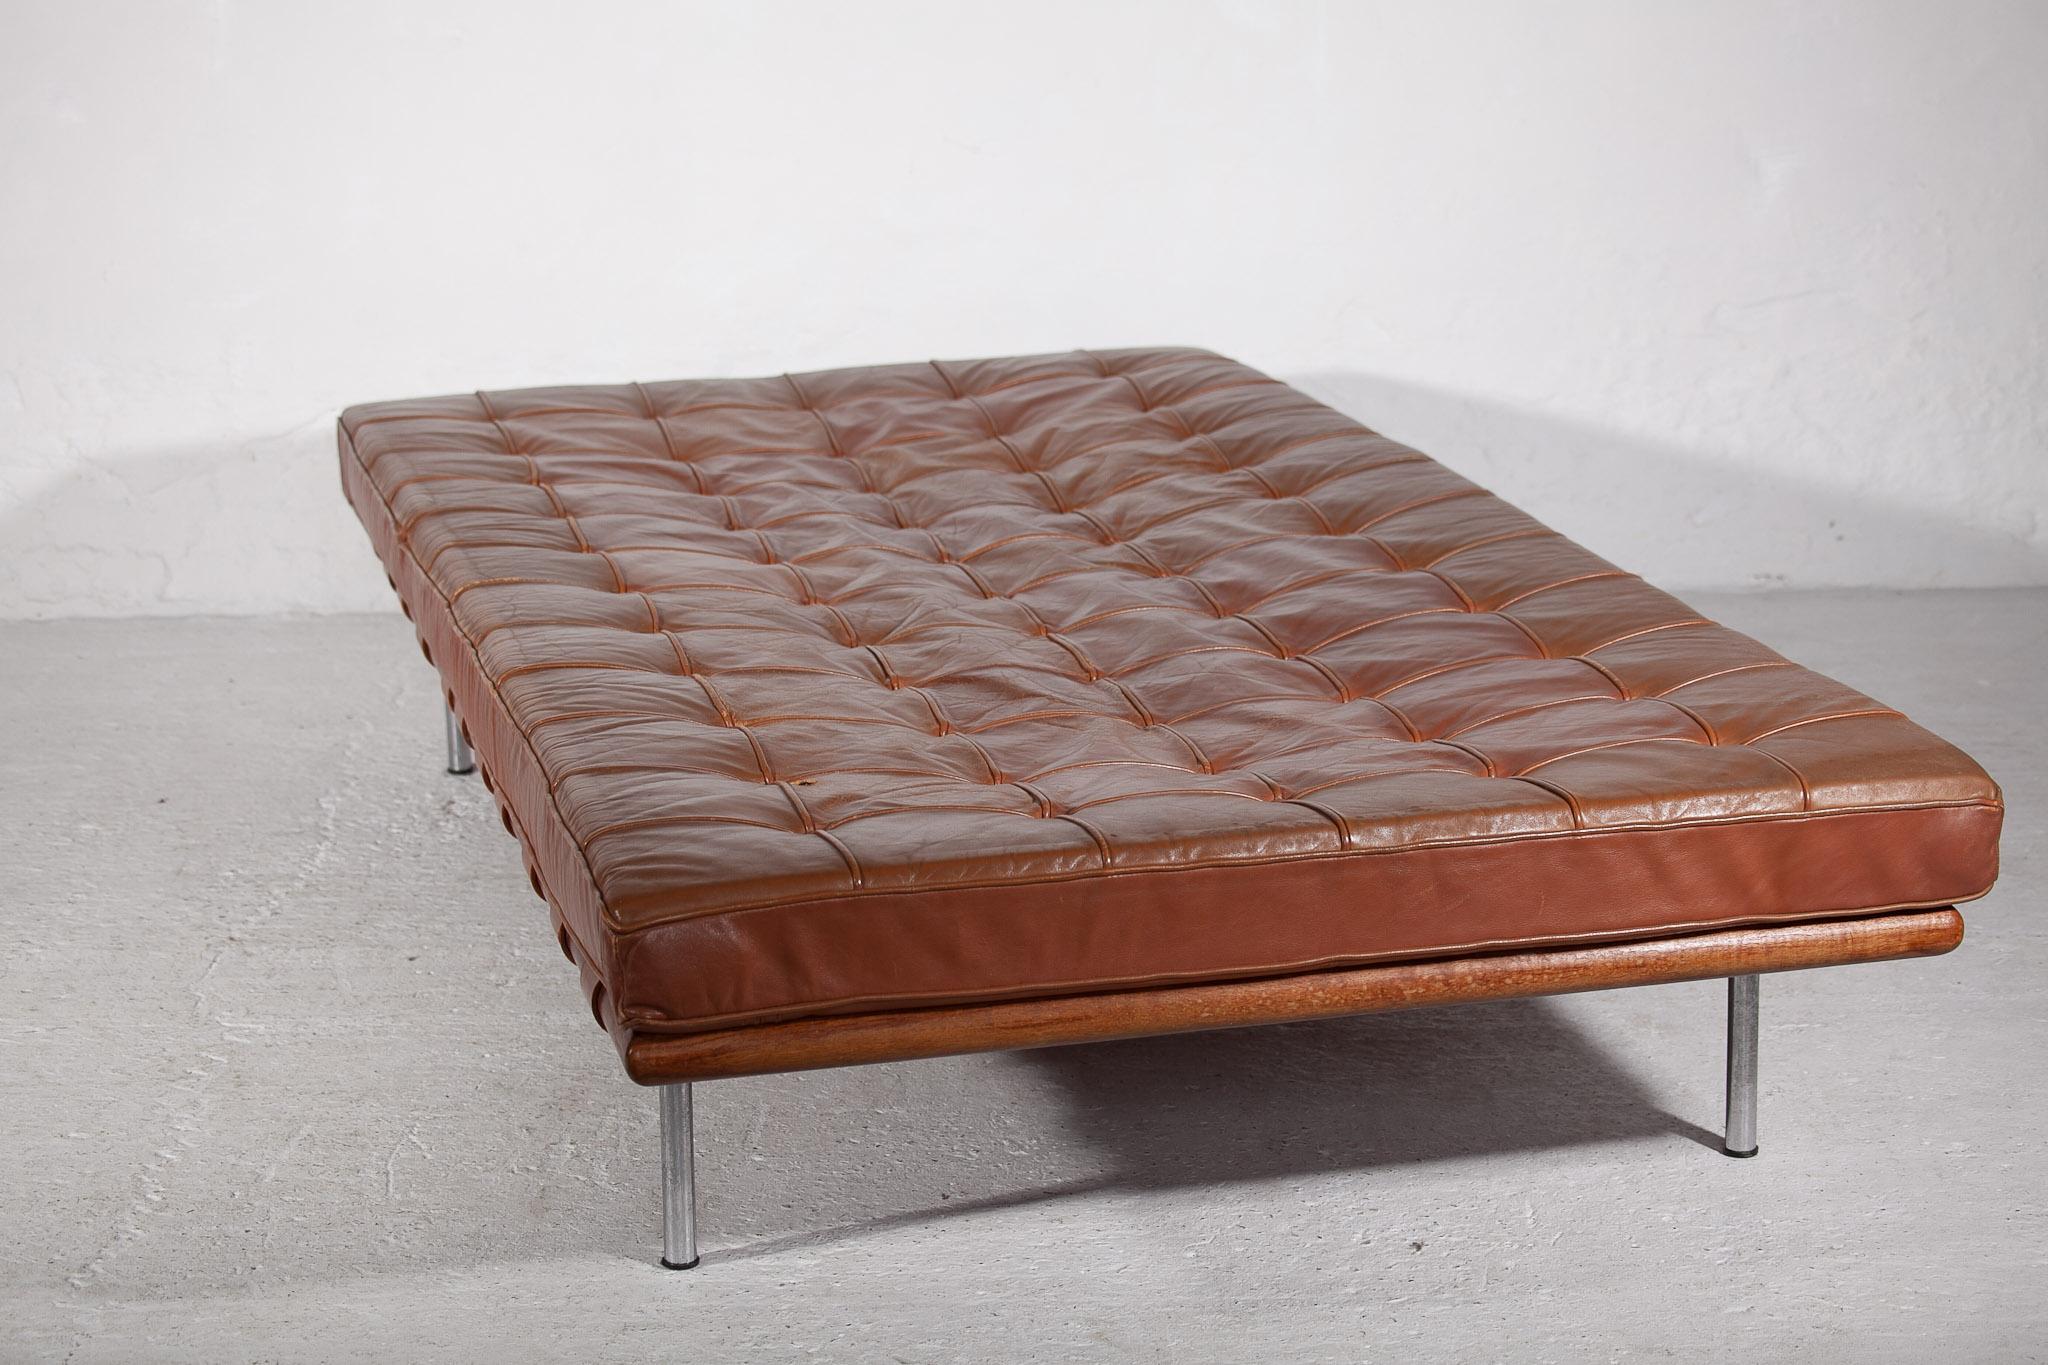 German Brown Leather Barcelona Daybed by Ludwig Mies van der Rohe, for Knoll